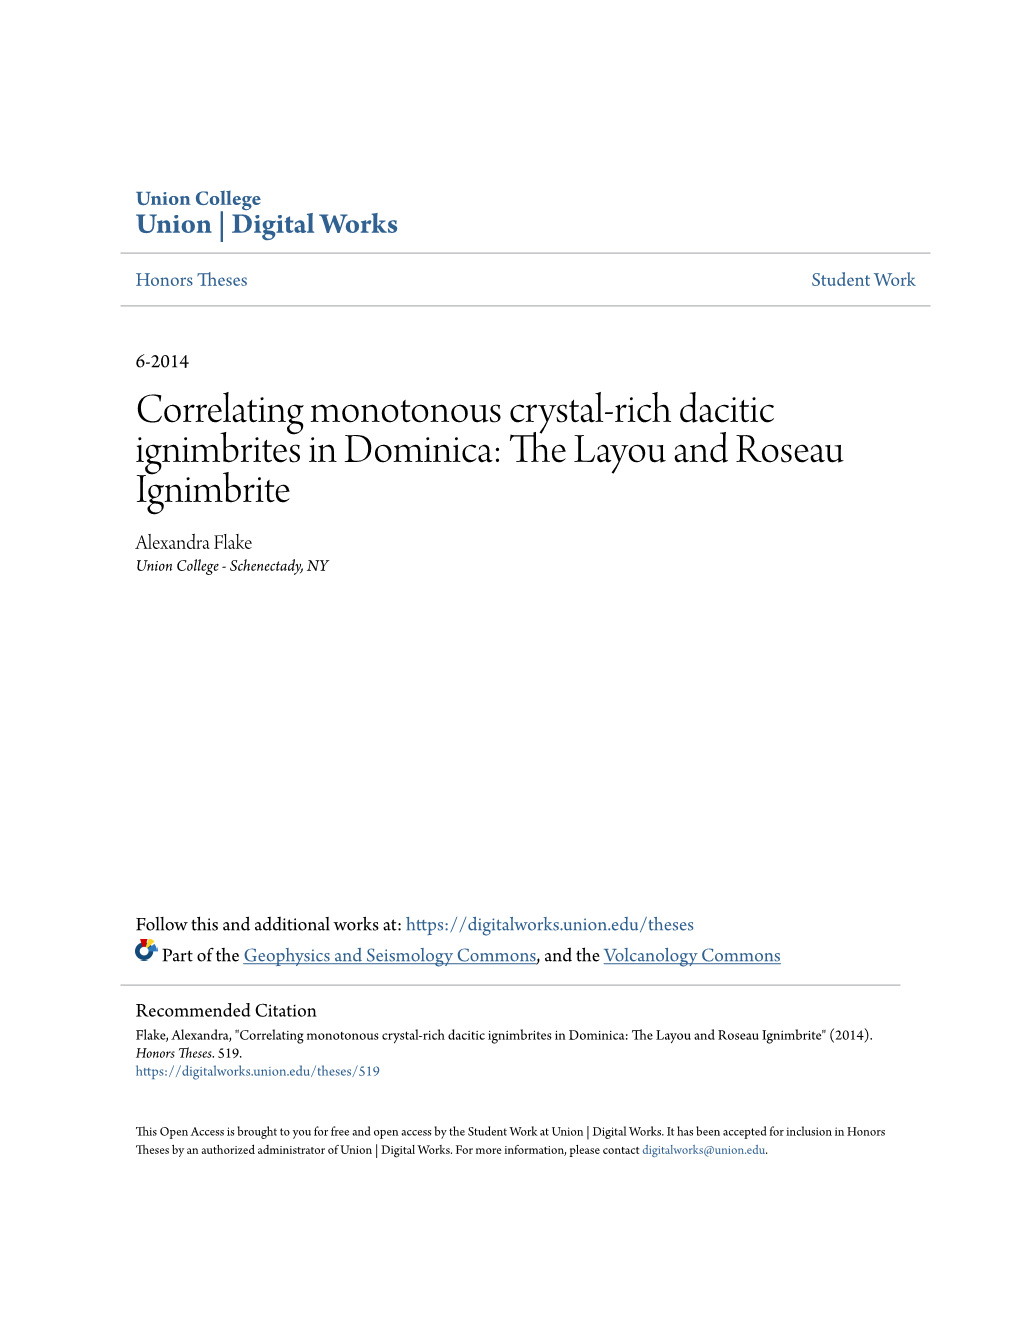 Correlating Monotonous Crystal-Rich Dacitic Ignimbrites in Dominica: the Layou and Roseau Ignimbrite Alexandra Flake Union College - Schenectady, NY